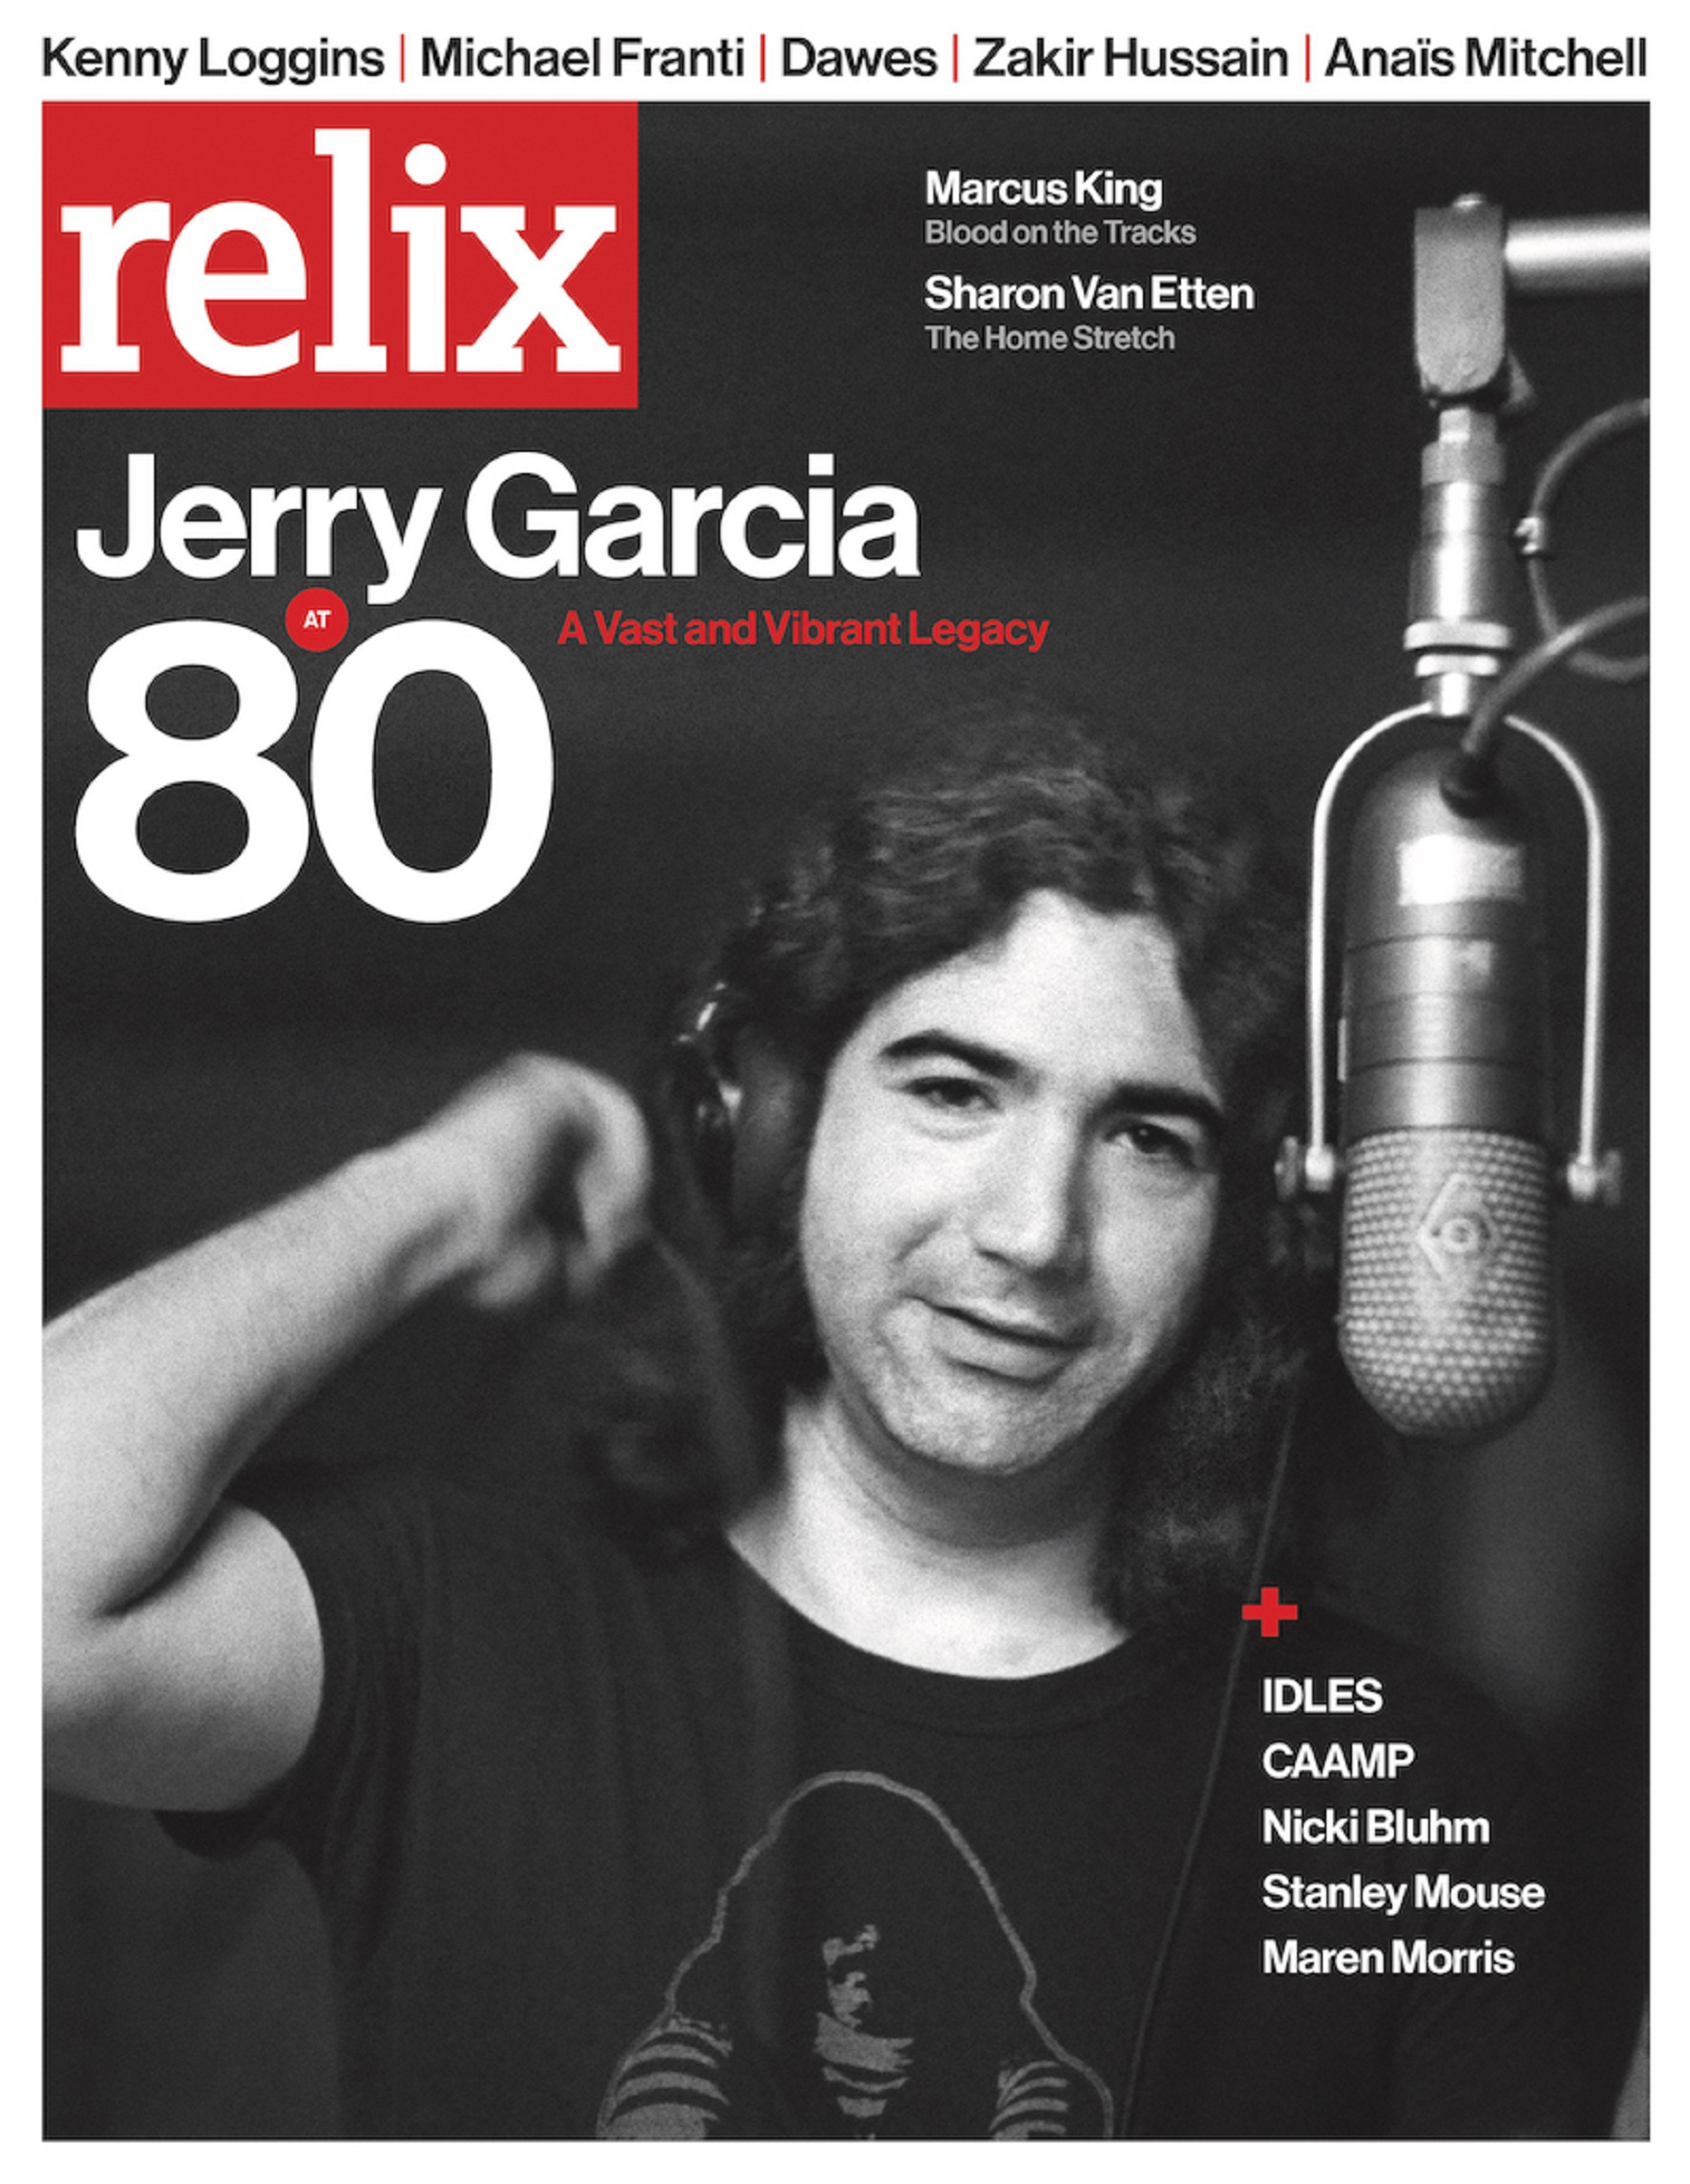 Relix Announces New Commemorative Issue Celebrating Jerry Garcia at 80